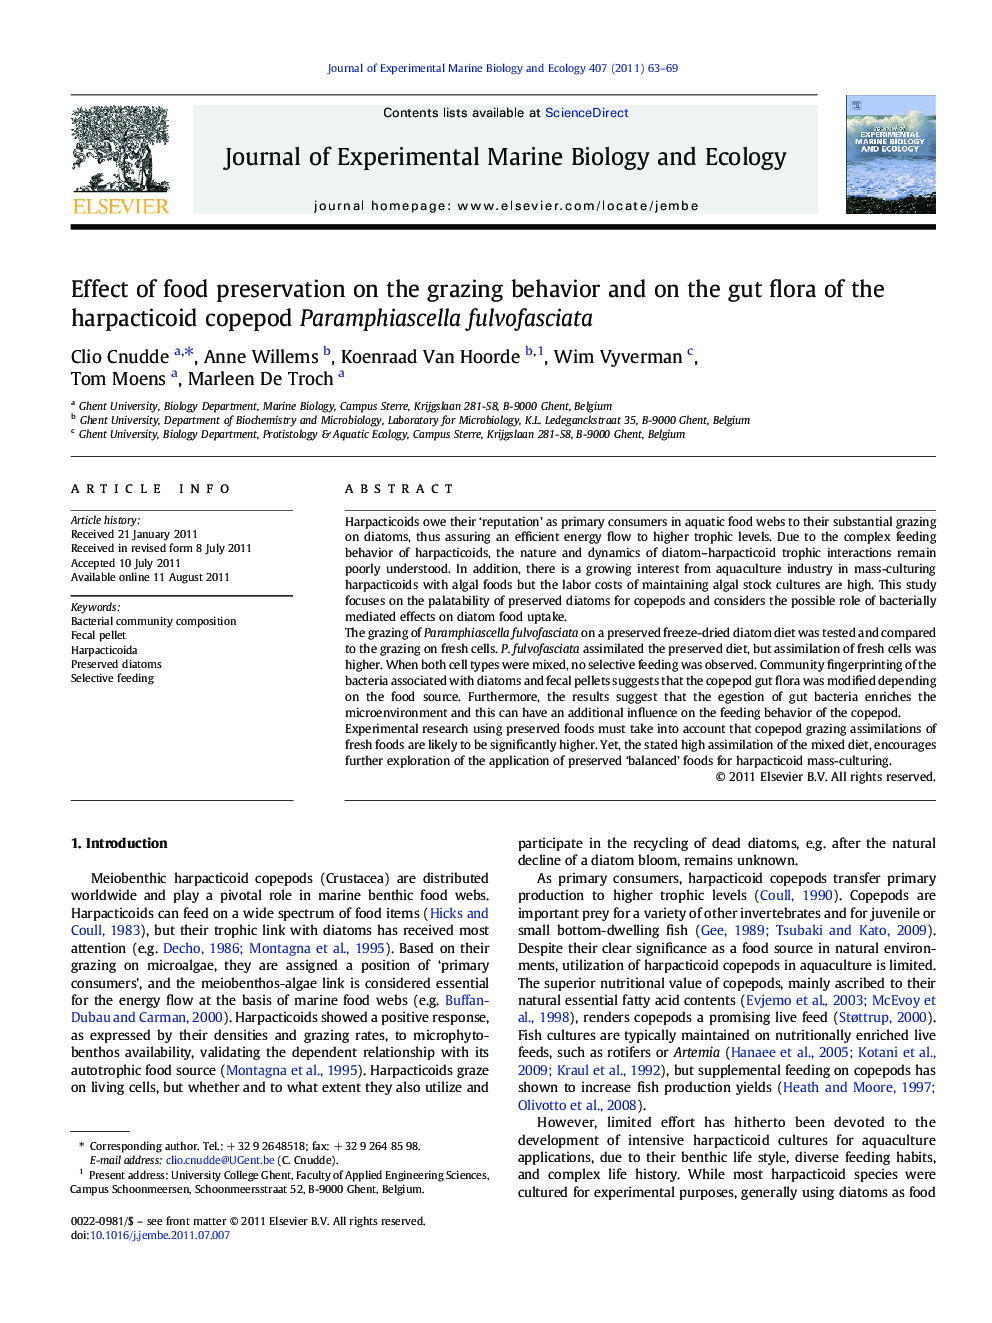 Effect of food preservation on the grazing behavior and on the gut flora of the harpacticoid copepod Paramphiascella fulvofasciata